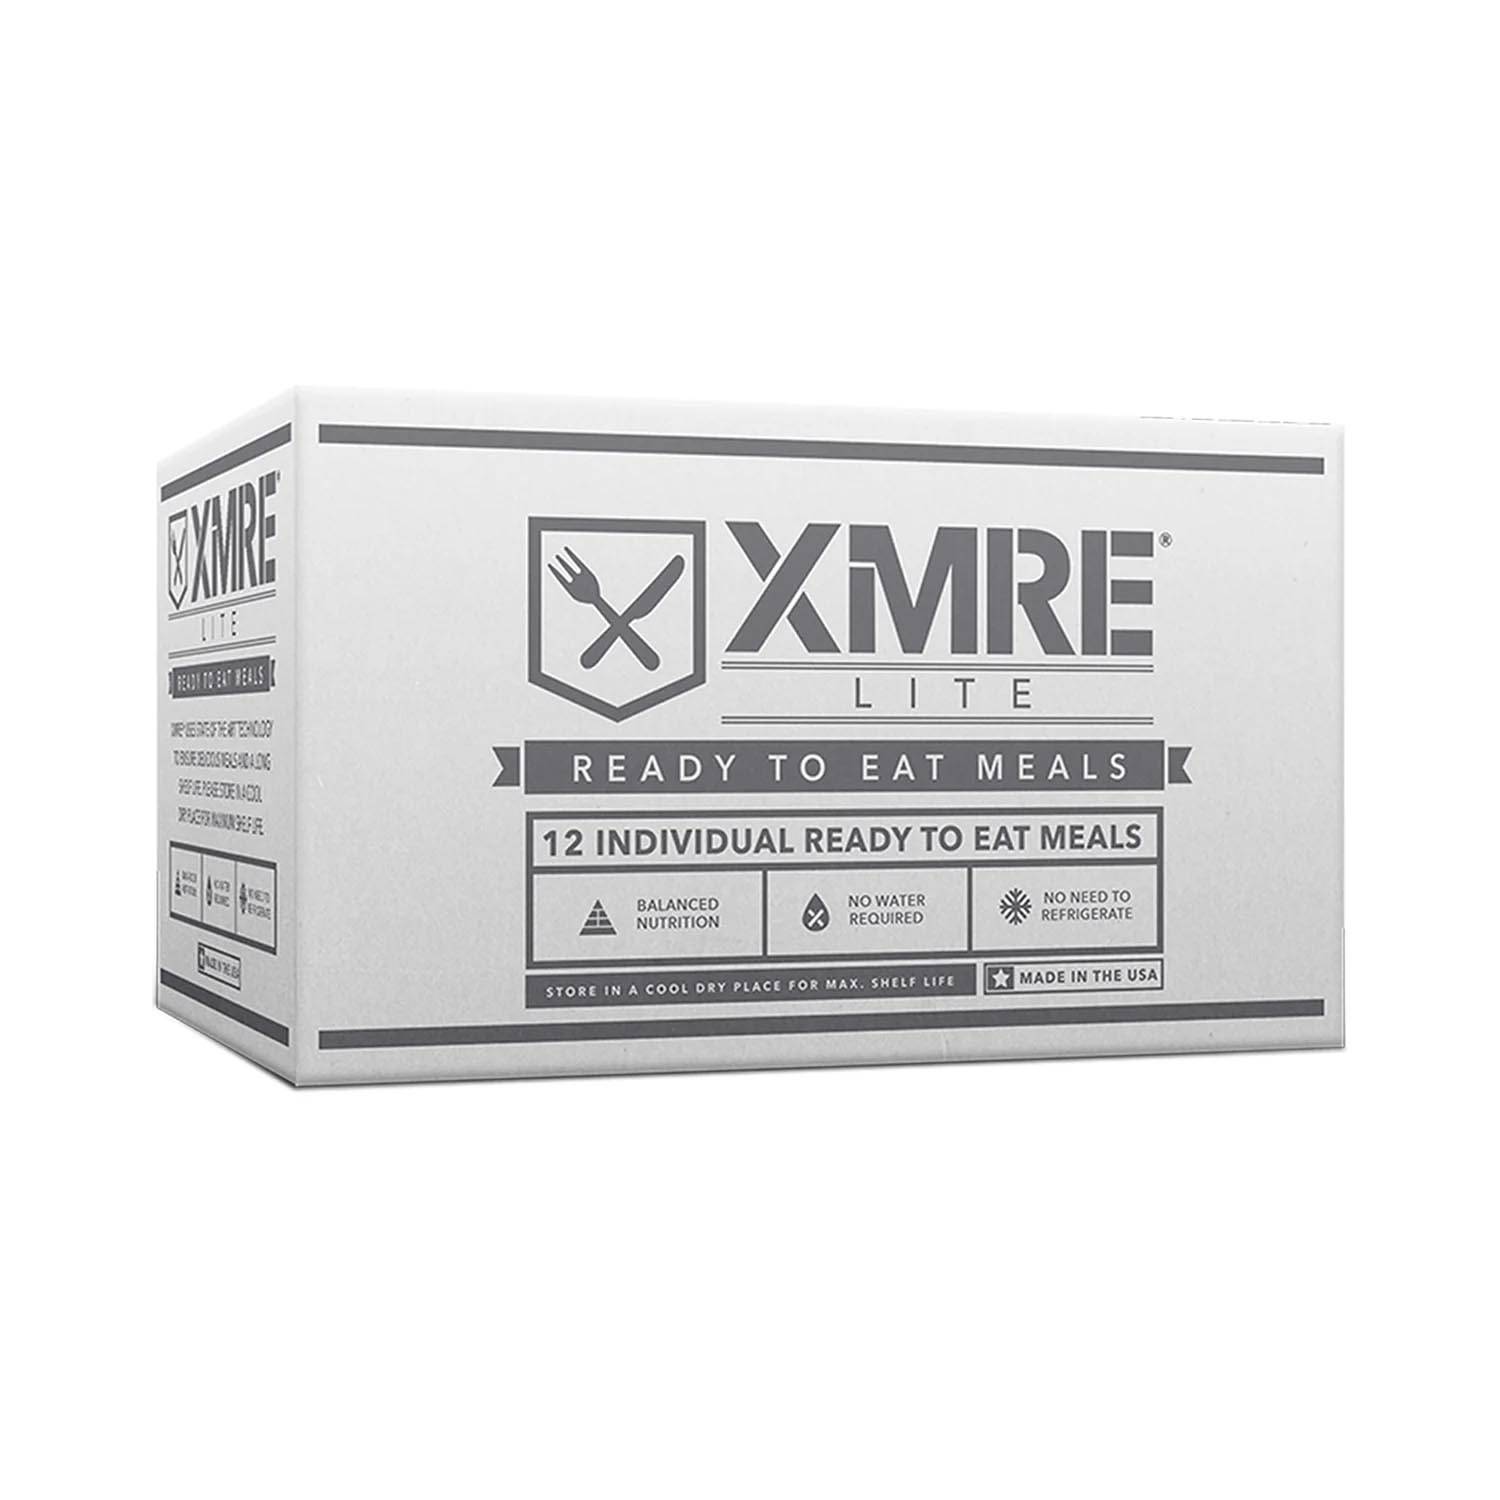 XMRE Lite Complete Meals Ready to Eat Case of 12 Survival